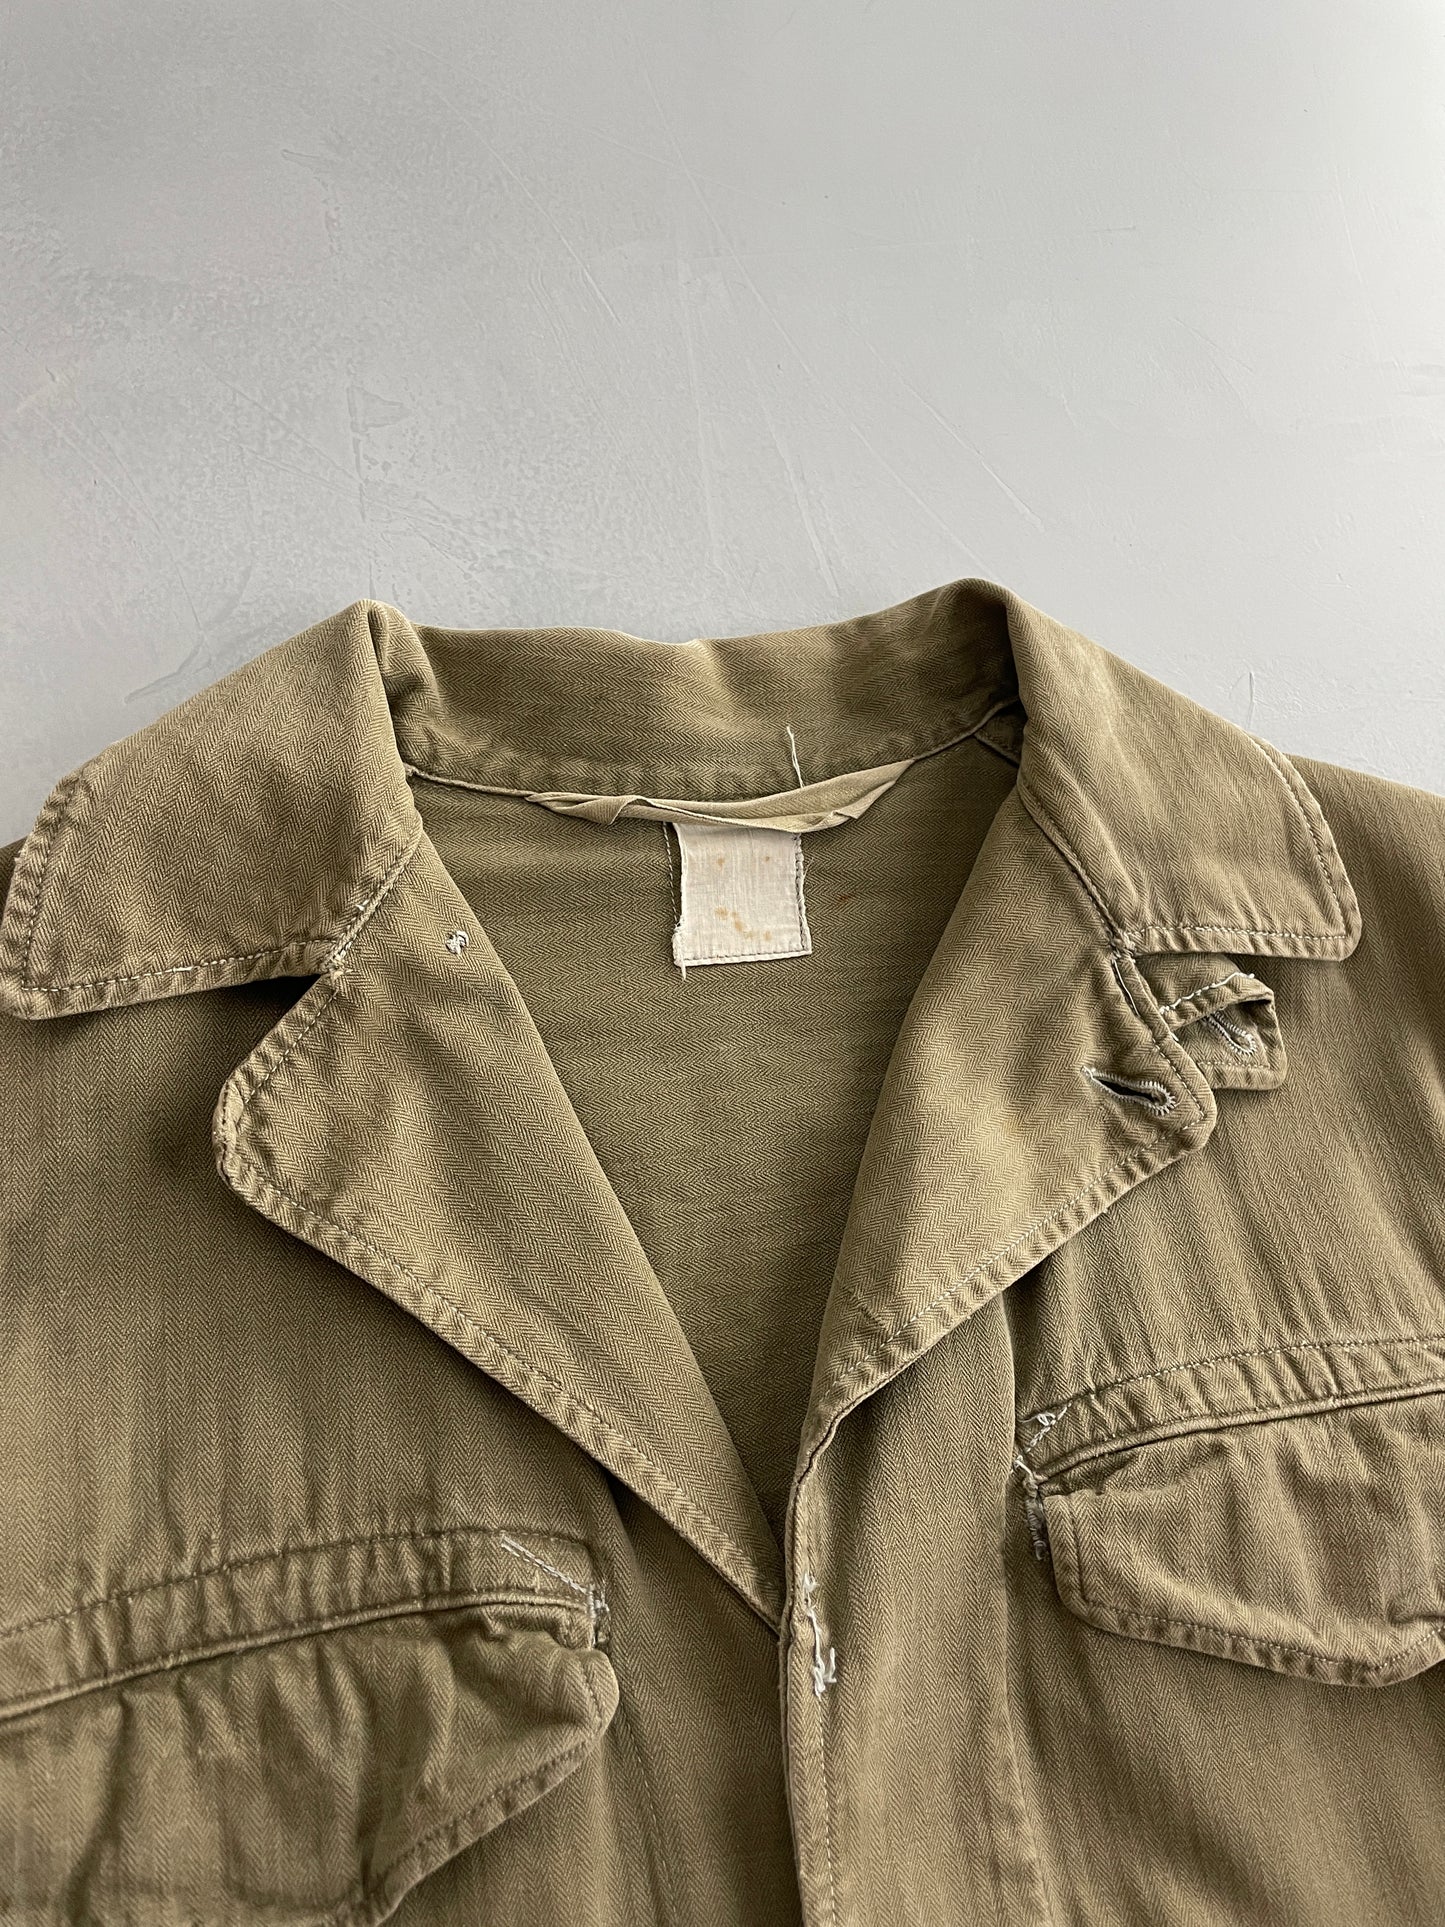 H.B.T. French Army Jacket [M]